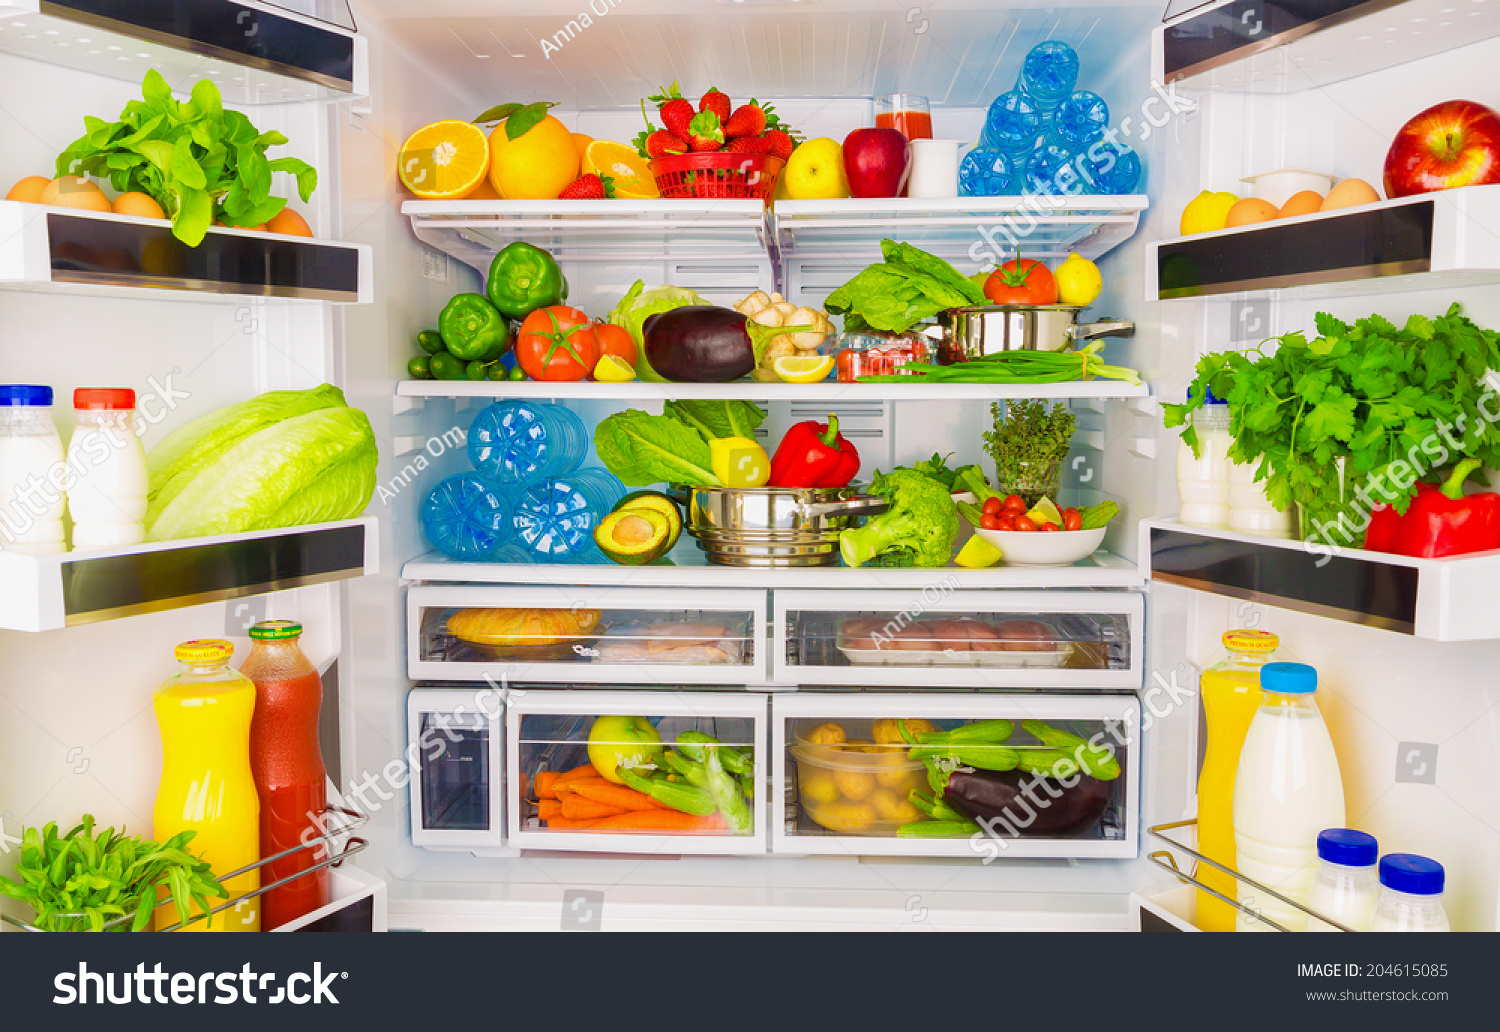 Open fridge full of fresh fruits and vegetables, healthy food background, organic nutrition, health care, dieting concept #204615085